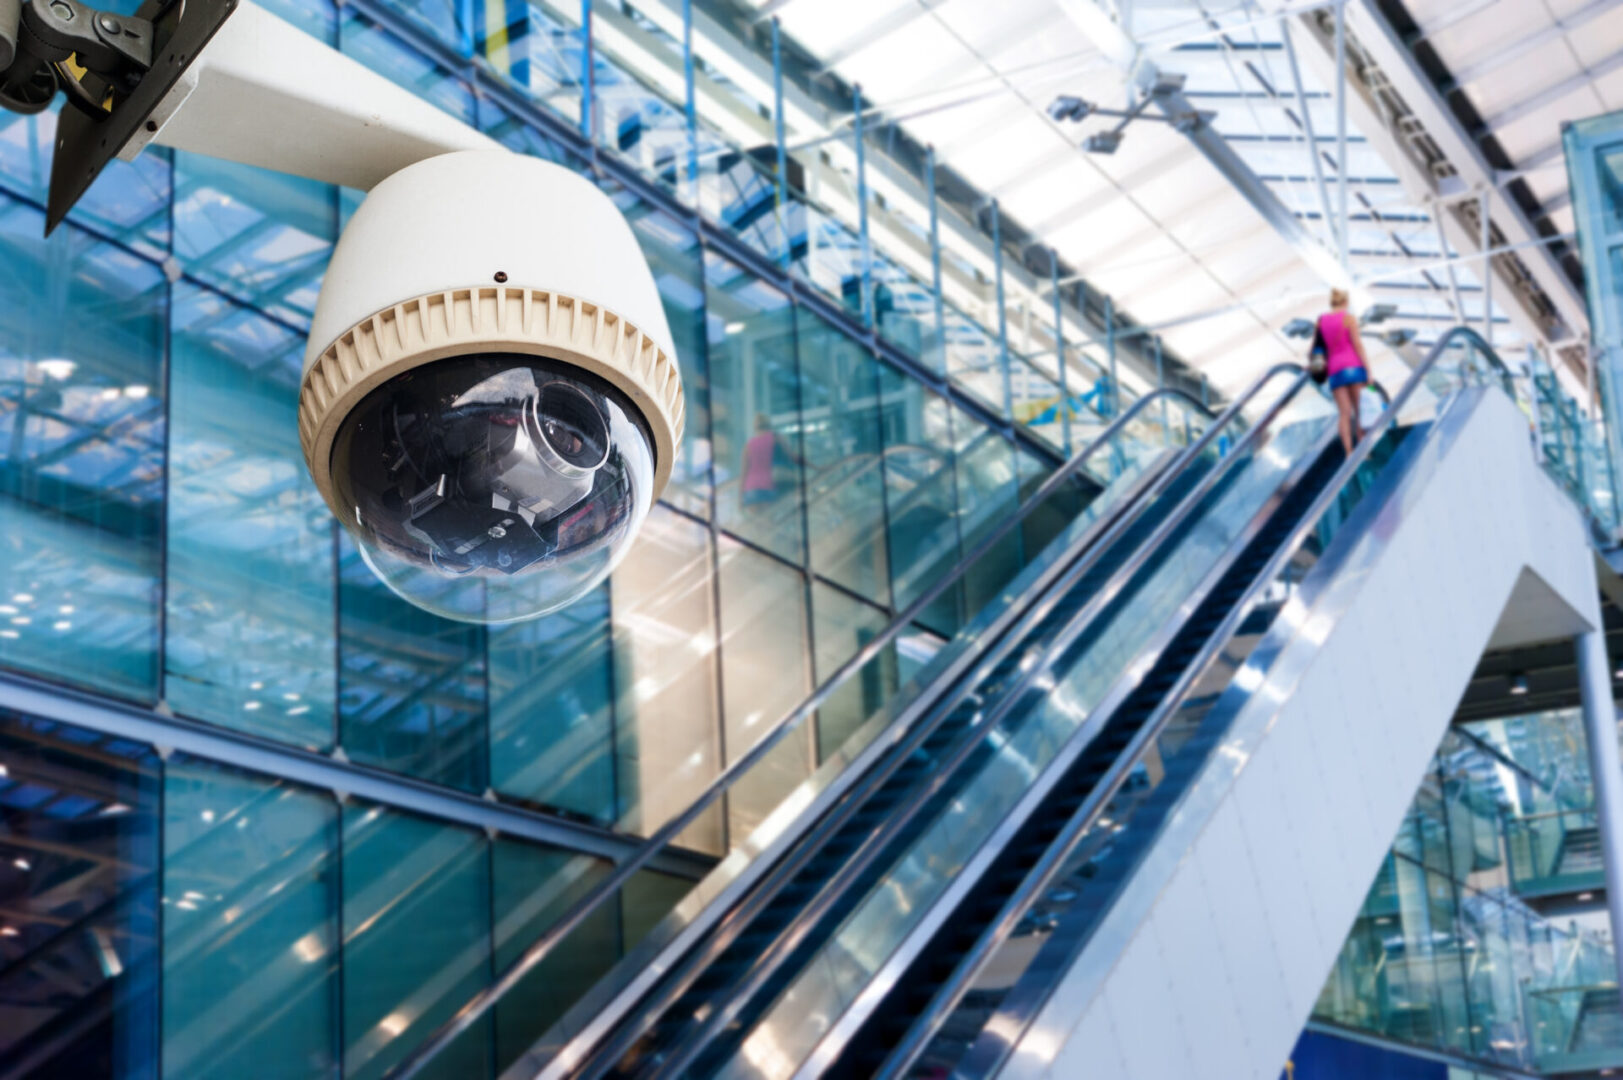 A security camera is mounted on the side of an escalator.